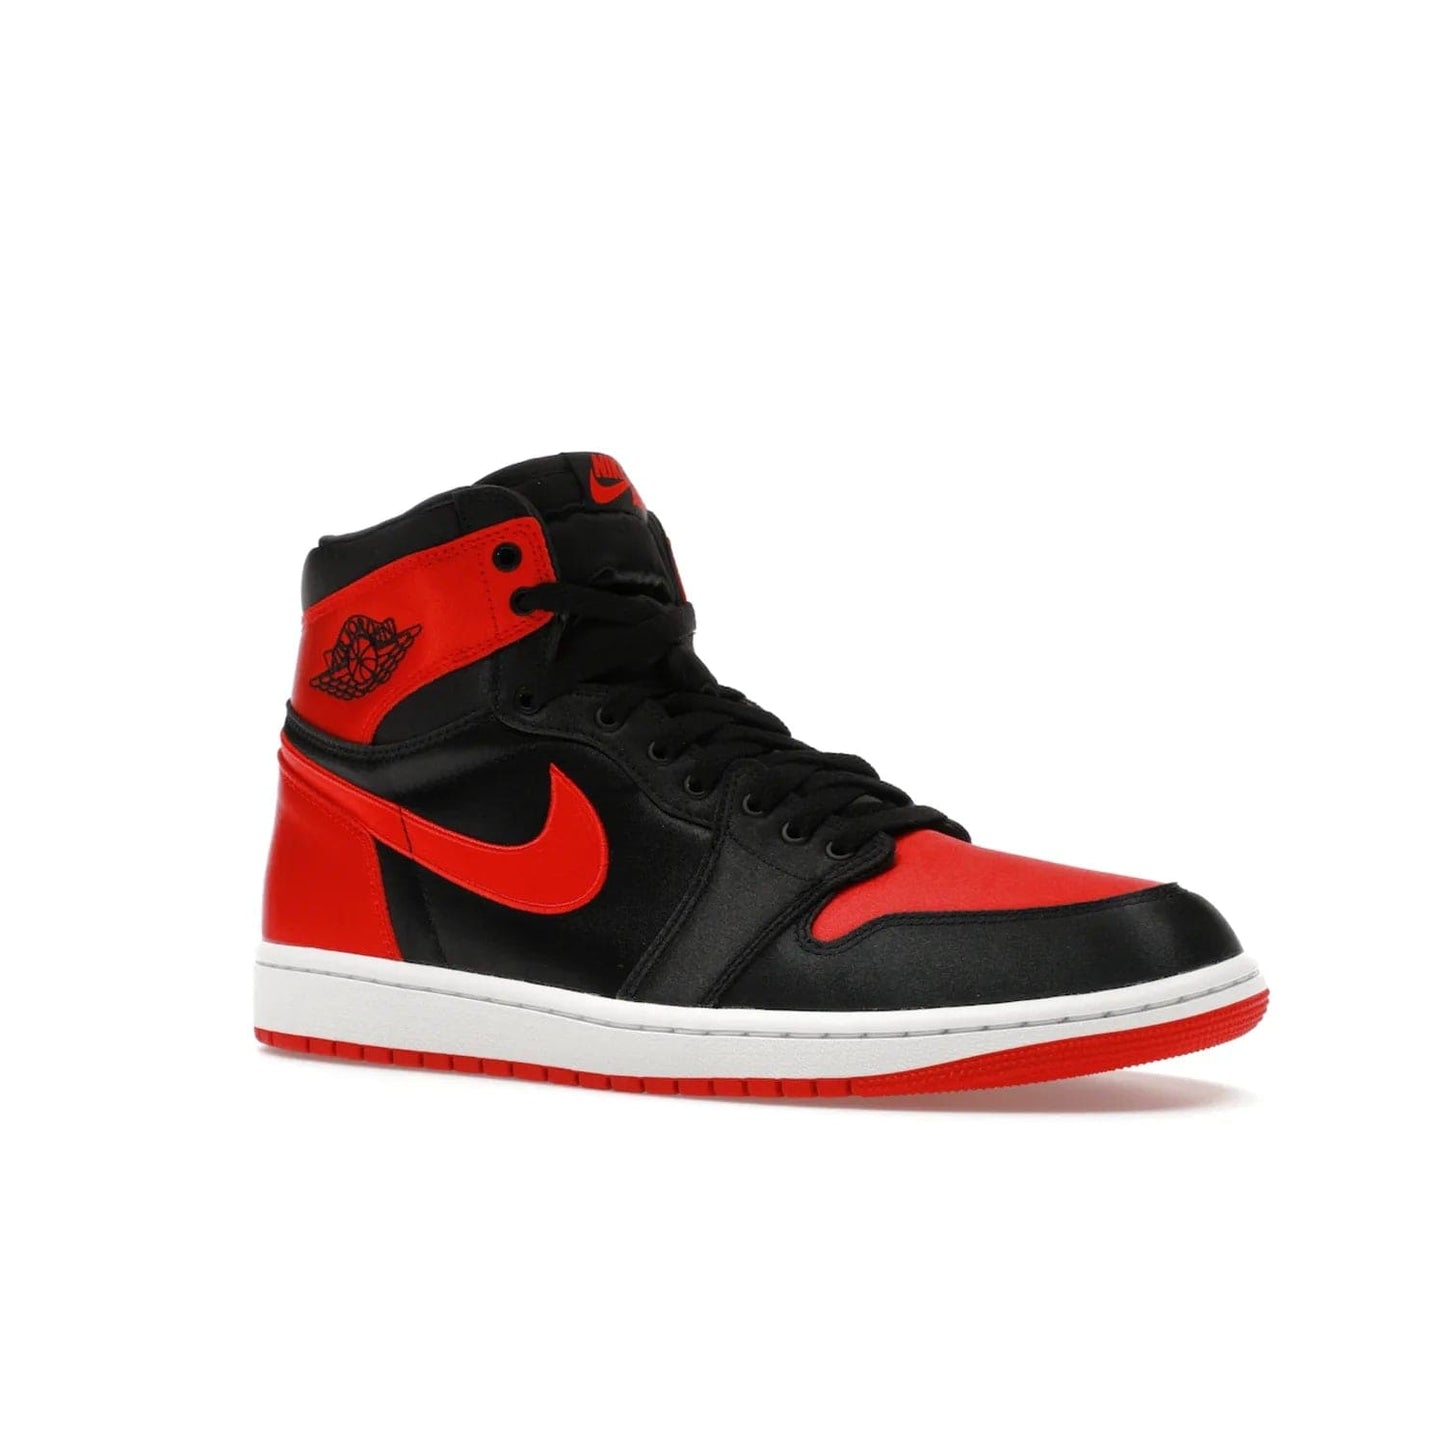 Jordan 1 Retro High OG Satin Bred (Women's) - Image 4 - Only at www.BallersClubKickz.com - Introducing the Jordan 1 Retro High OG Satin Bred (Women's). Luxe satin finish, contrasting hues & classic accents. Trending sneakers symbolizing timelessness & heritage. Make a bold statement with this iconic shoe. Available October 4, 2023.